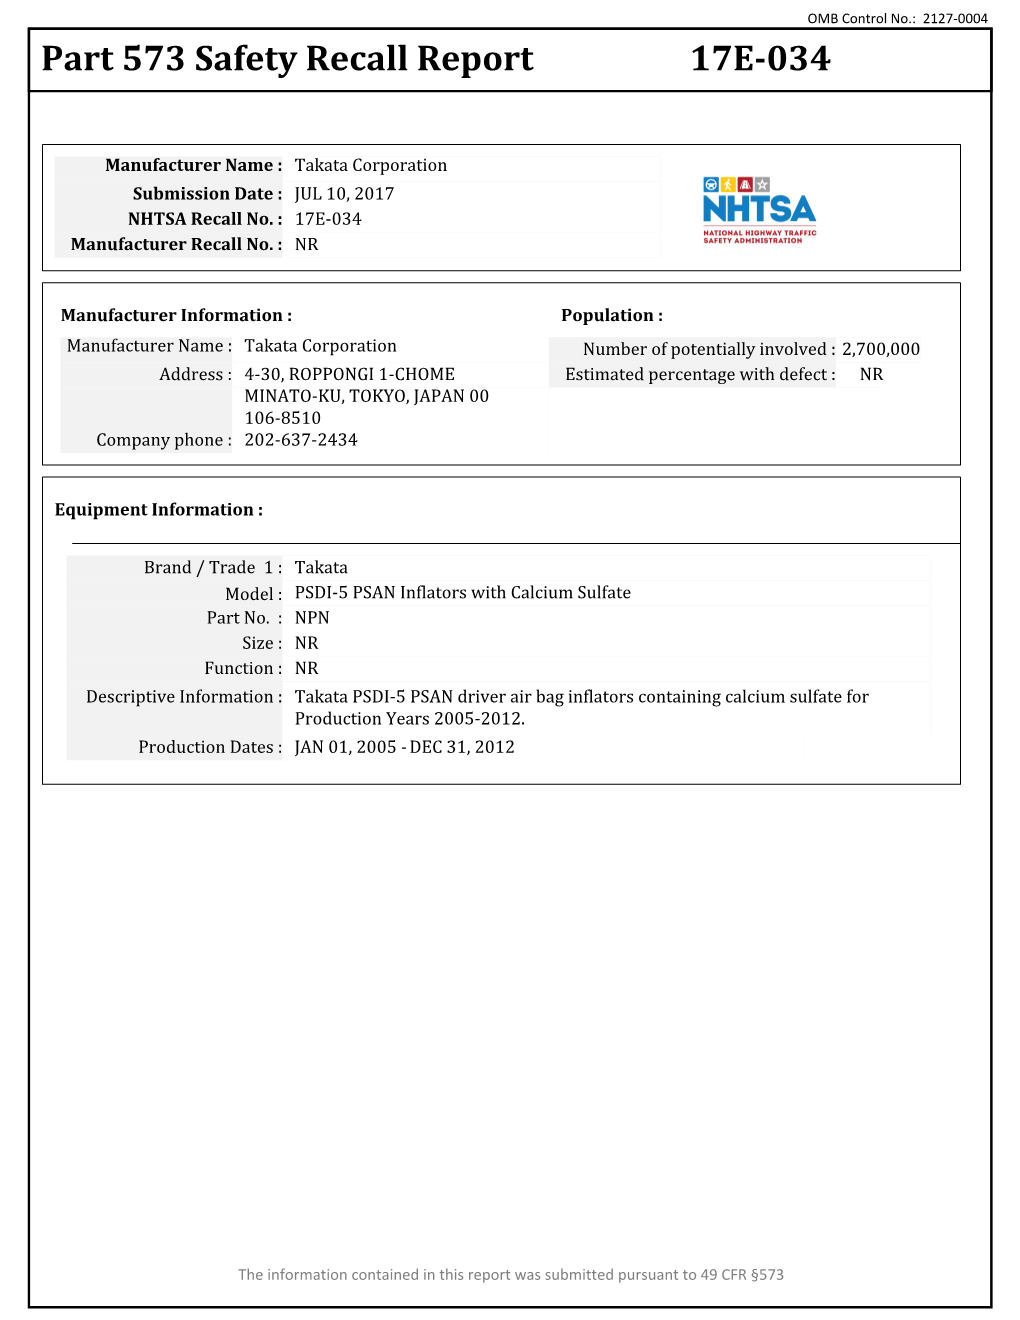 Part 573 Safety Recall Report 17E-034